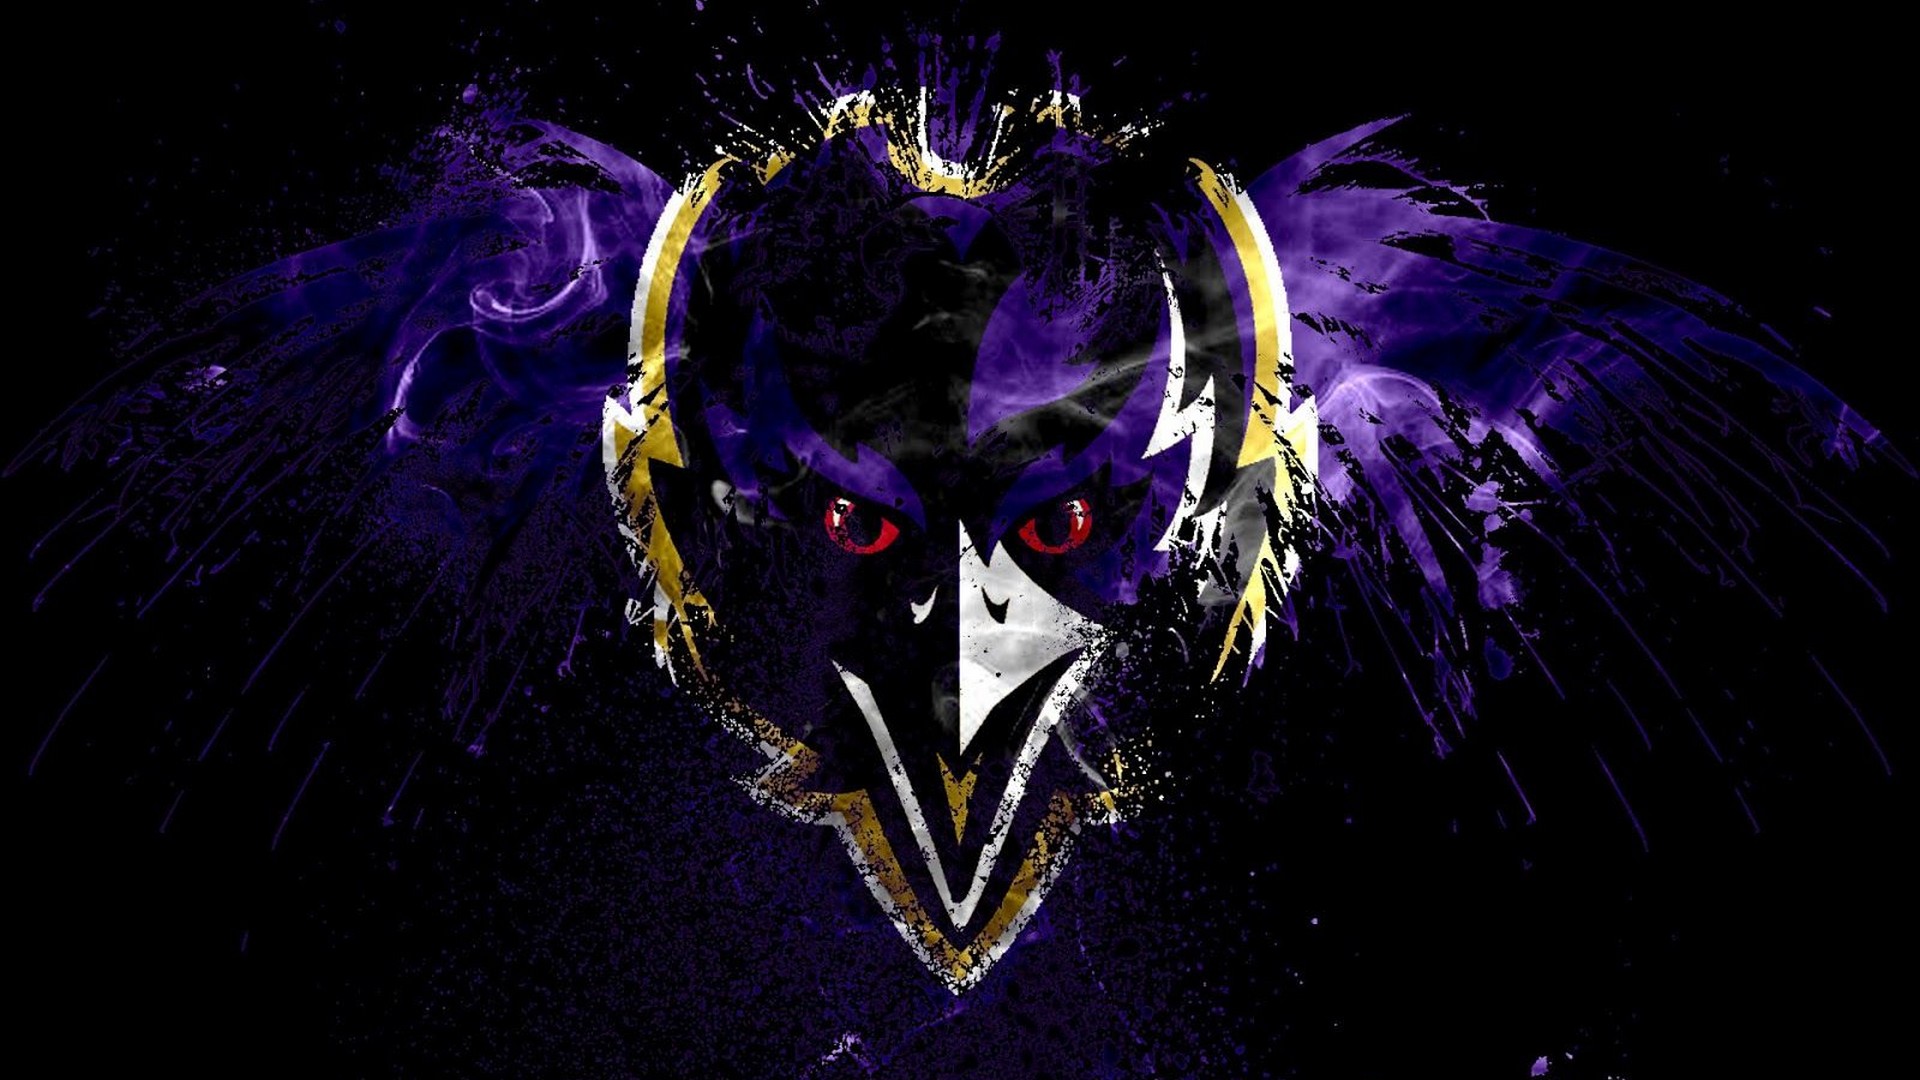 Wallpaper Desktop Ravens HD With high-resolution 1920X1080 pixel. You can use this wallpaper for your Mac or Windows Desktop Background, iPhone, Android or Tablet and another Smartphone device